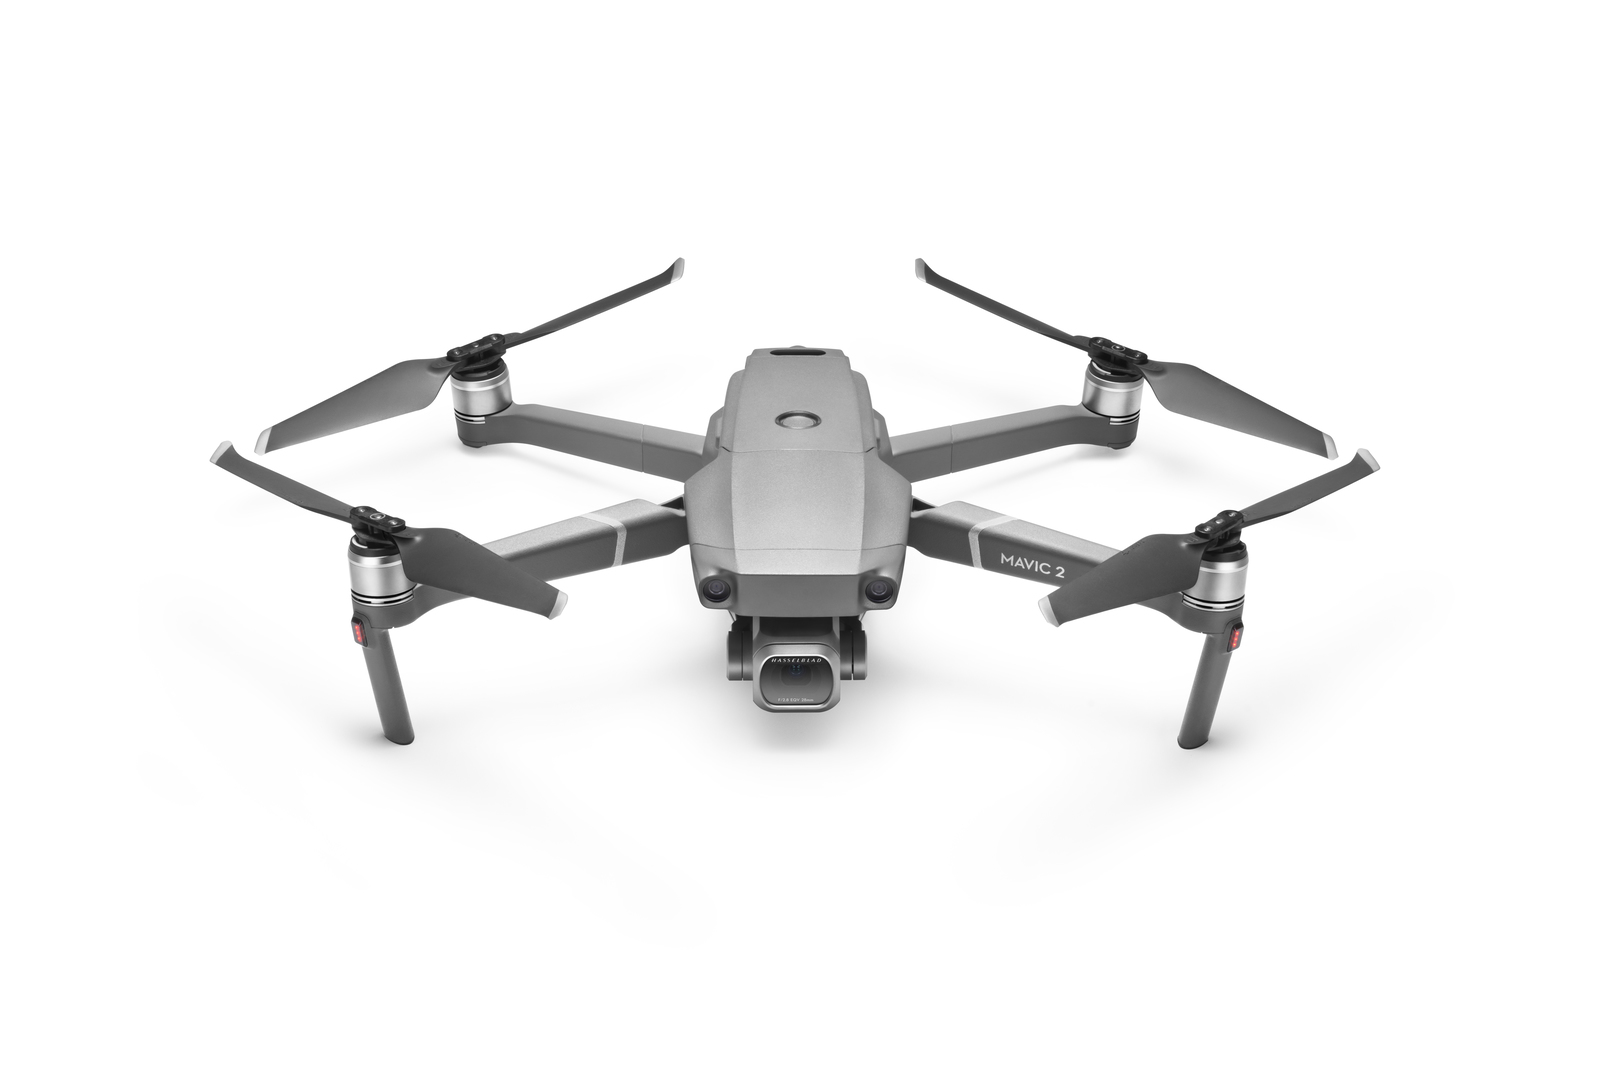 Mavic 2 Pro drone top and front perspective view on an unfolded position on a white backdraft